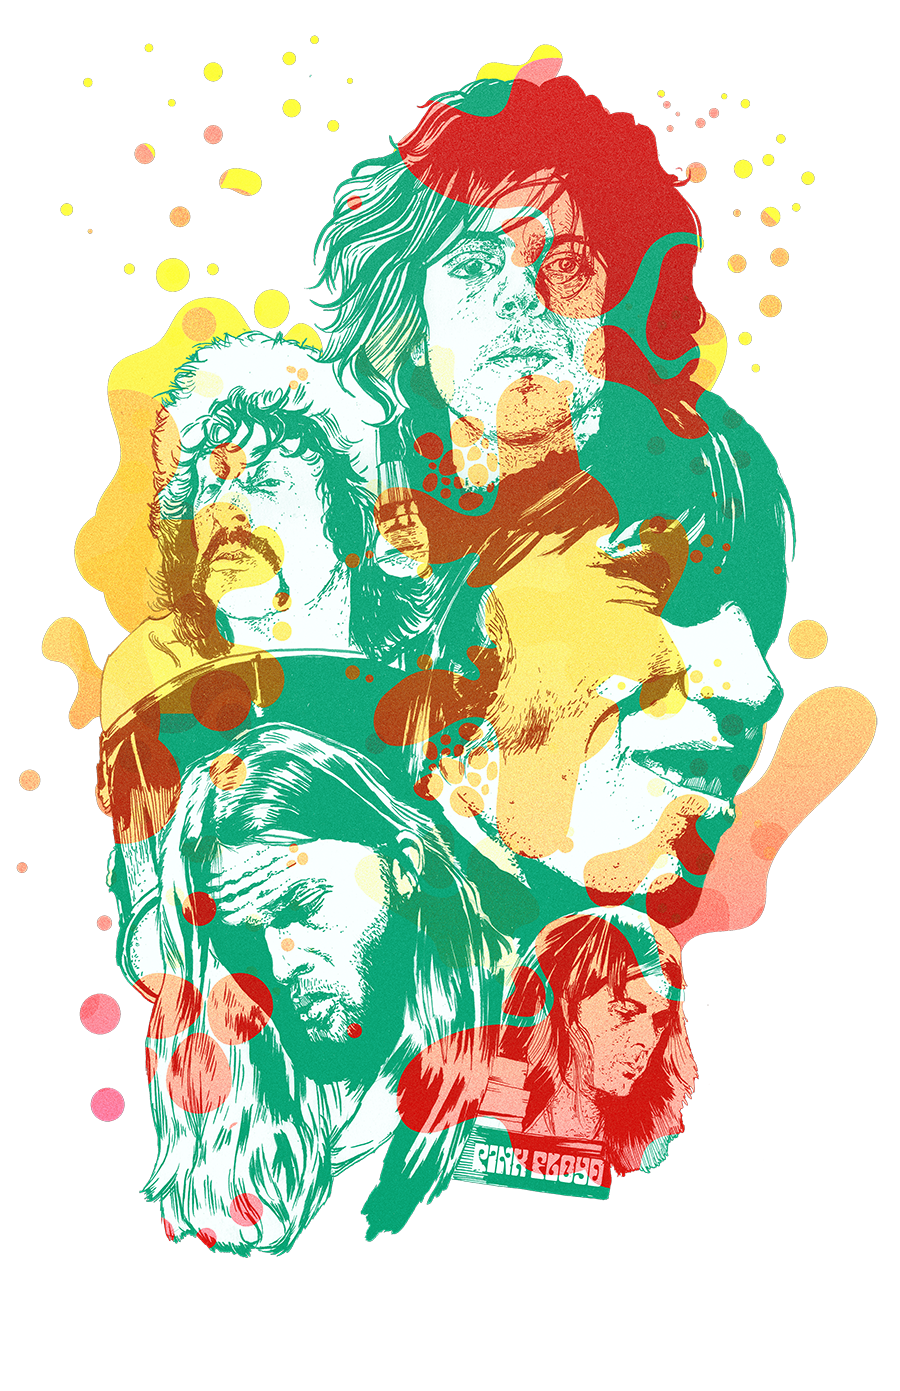 pink floyd acid rock trippy psychedelic syd barret David Gilmour roger waters rick wright nick mason